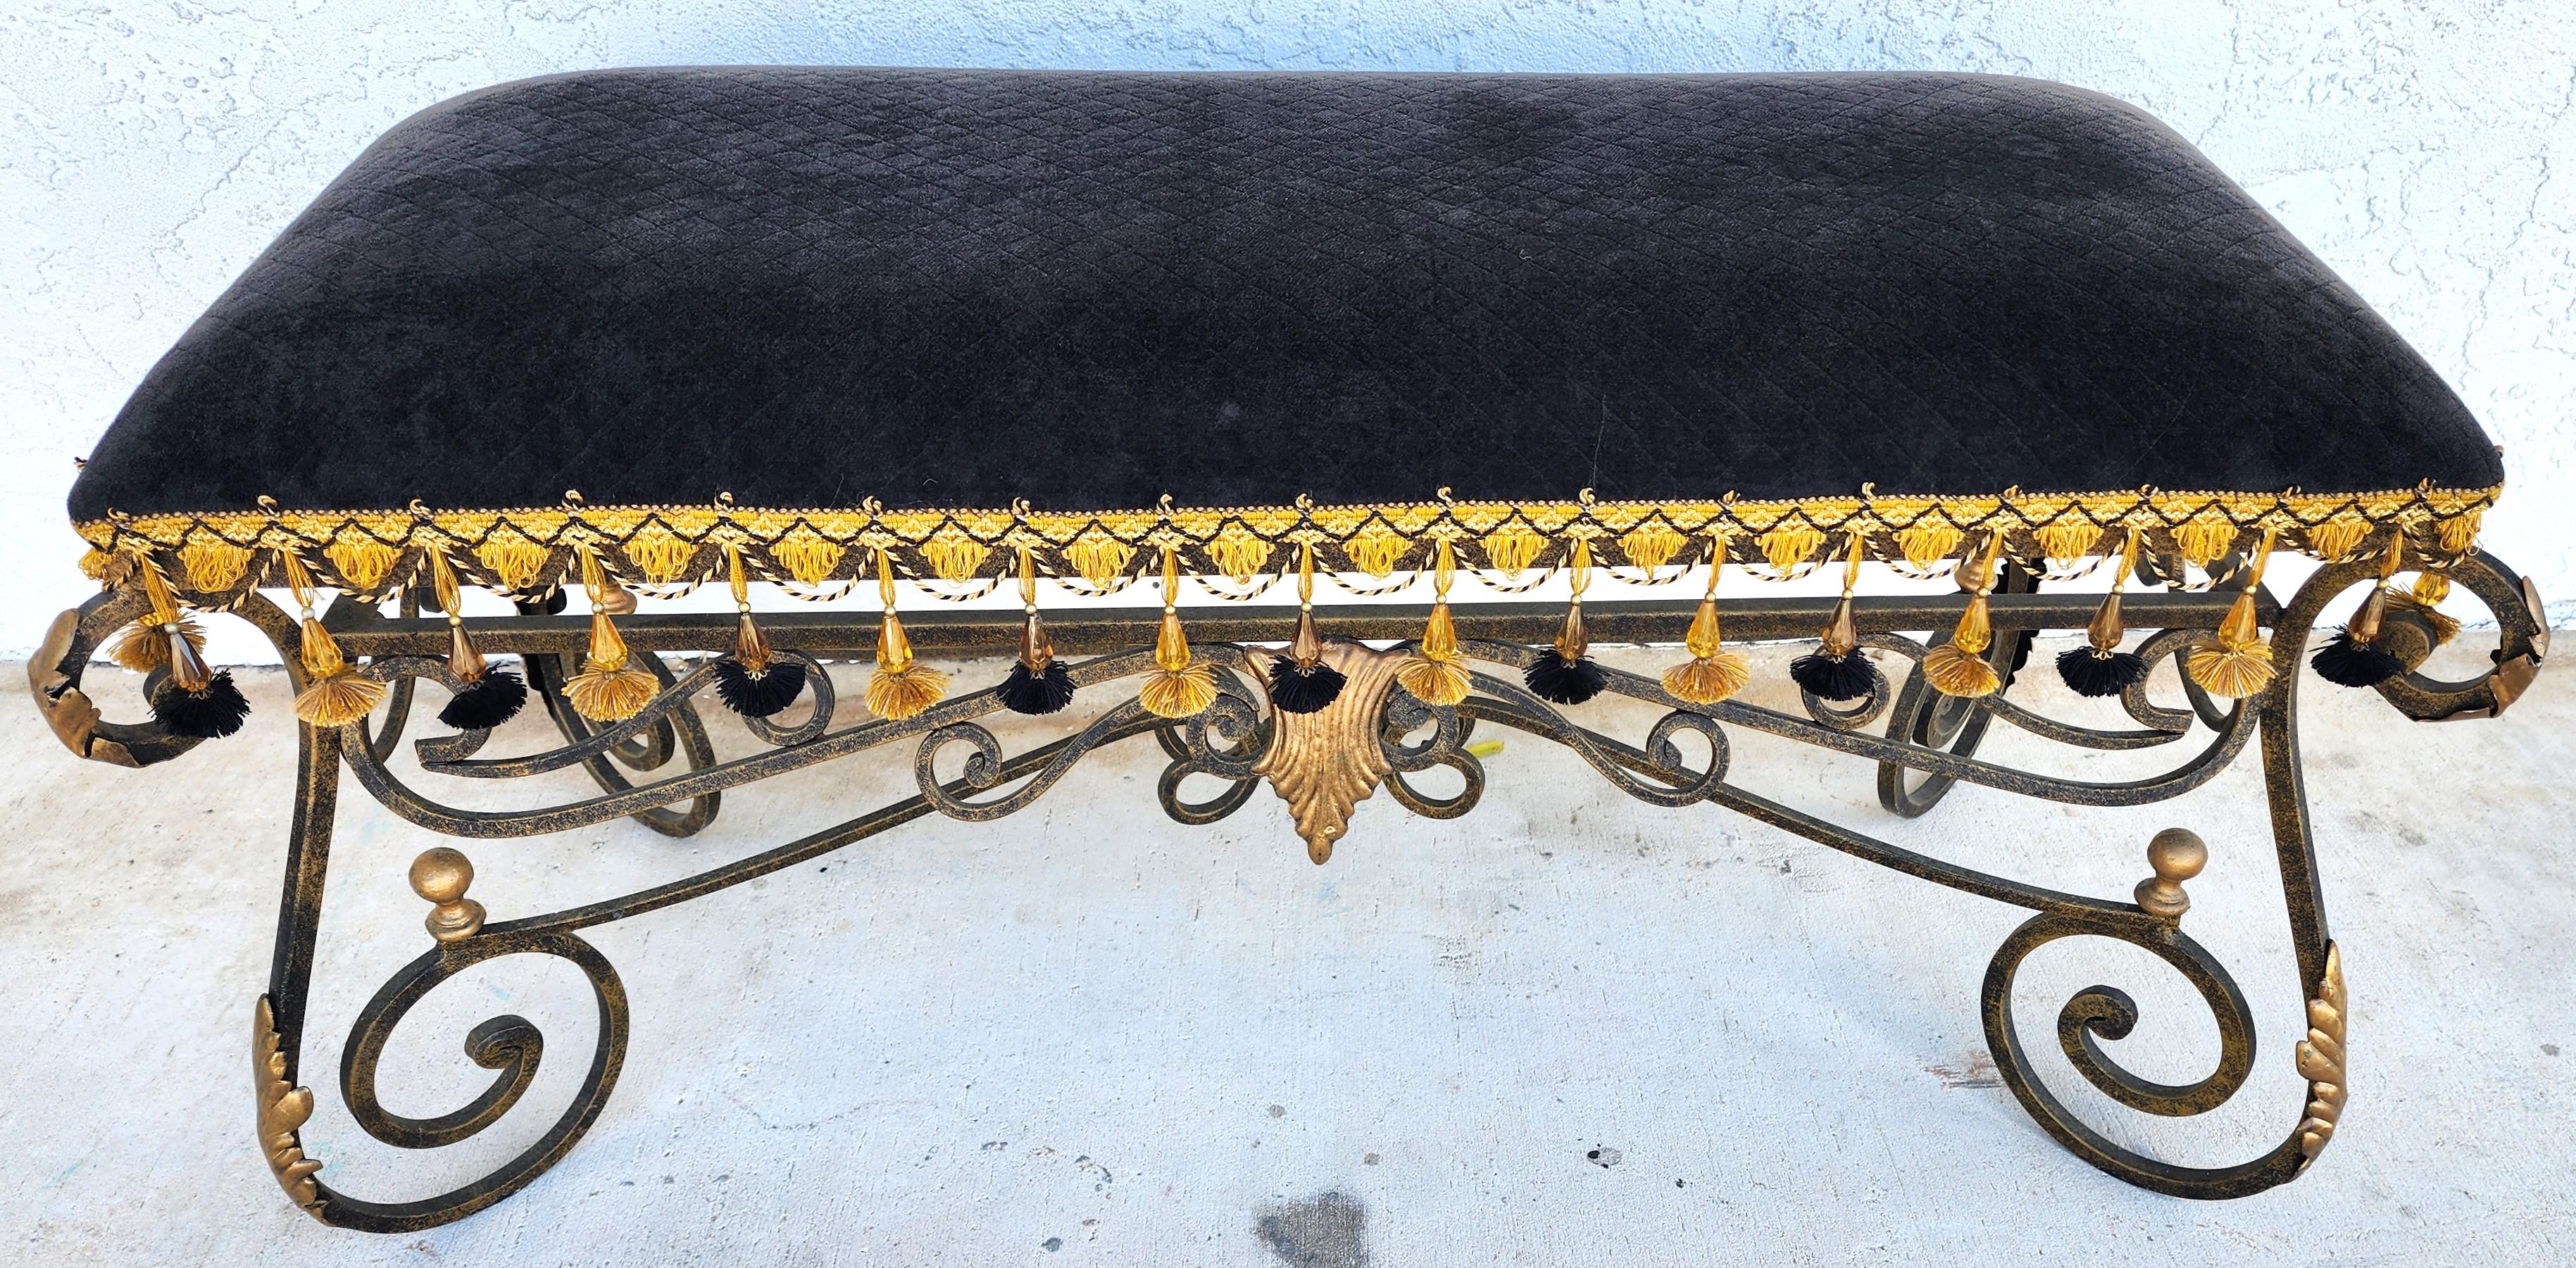 For FULL item description click on CONTINUE READING at the bottom of this page.

Offering One Of Our Recent Palm Beach Estate Fine Furniture Acquisitions Of A
French Louis XV Style Wrought Iron Bench with Ormolu Mounts
Seat fabric is